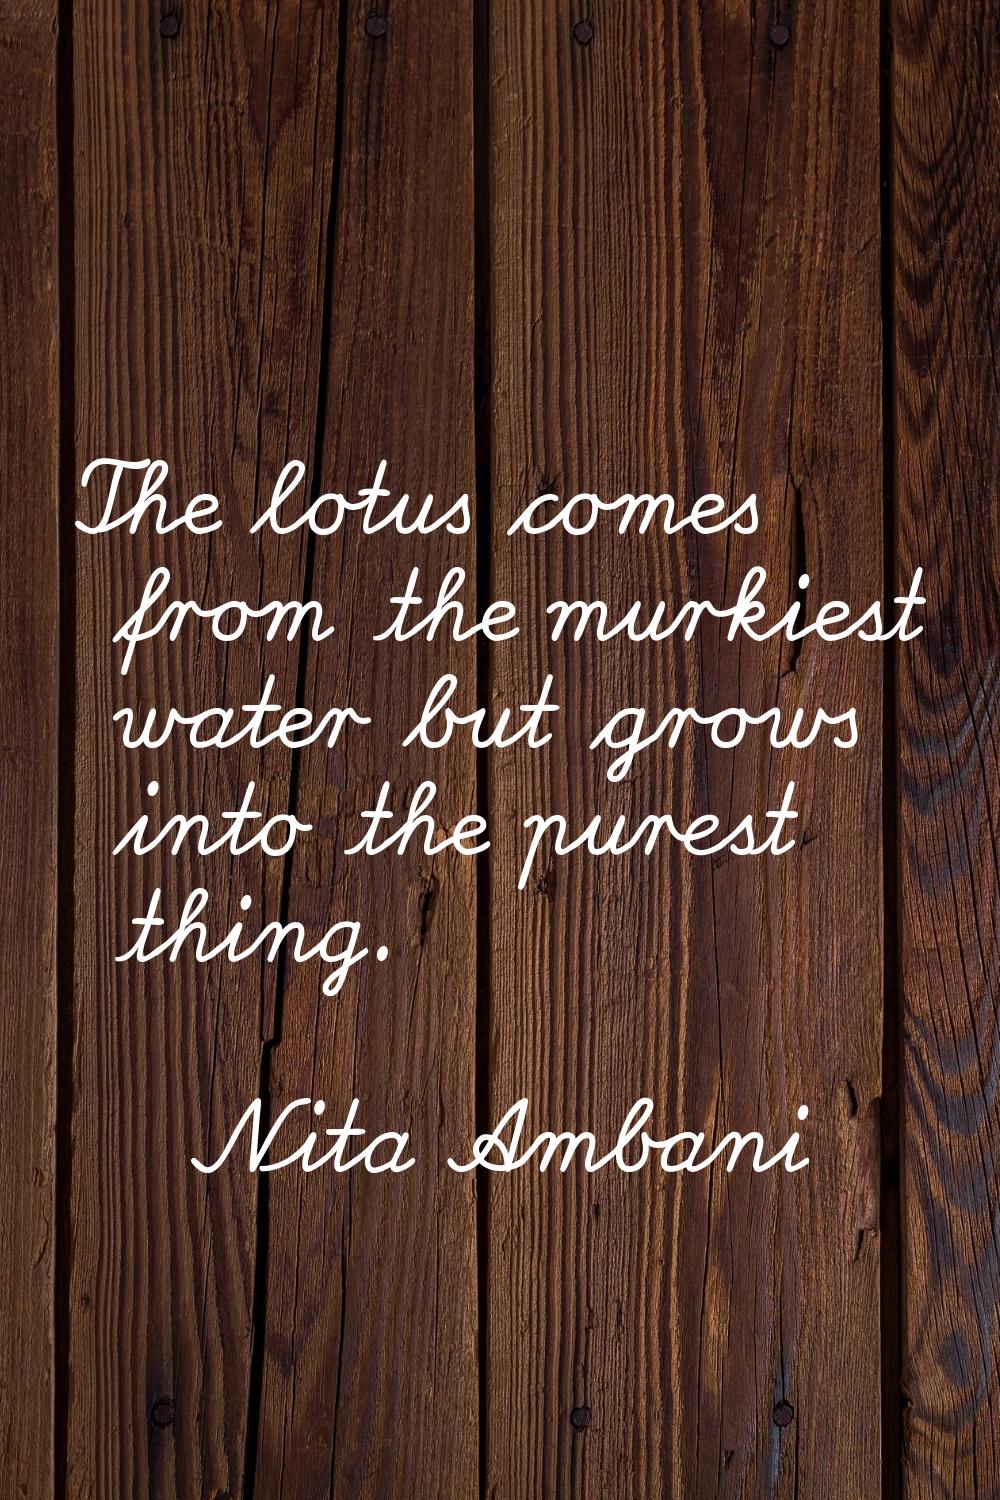 The lotus comes from the murkiest water but grows into the purest thing.